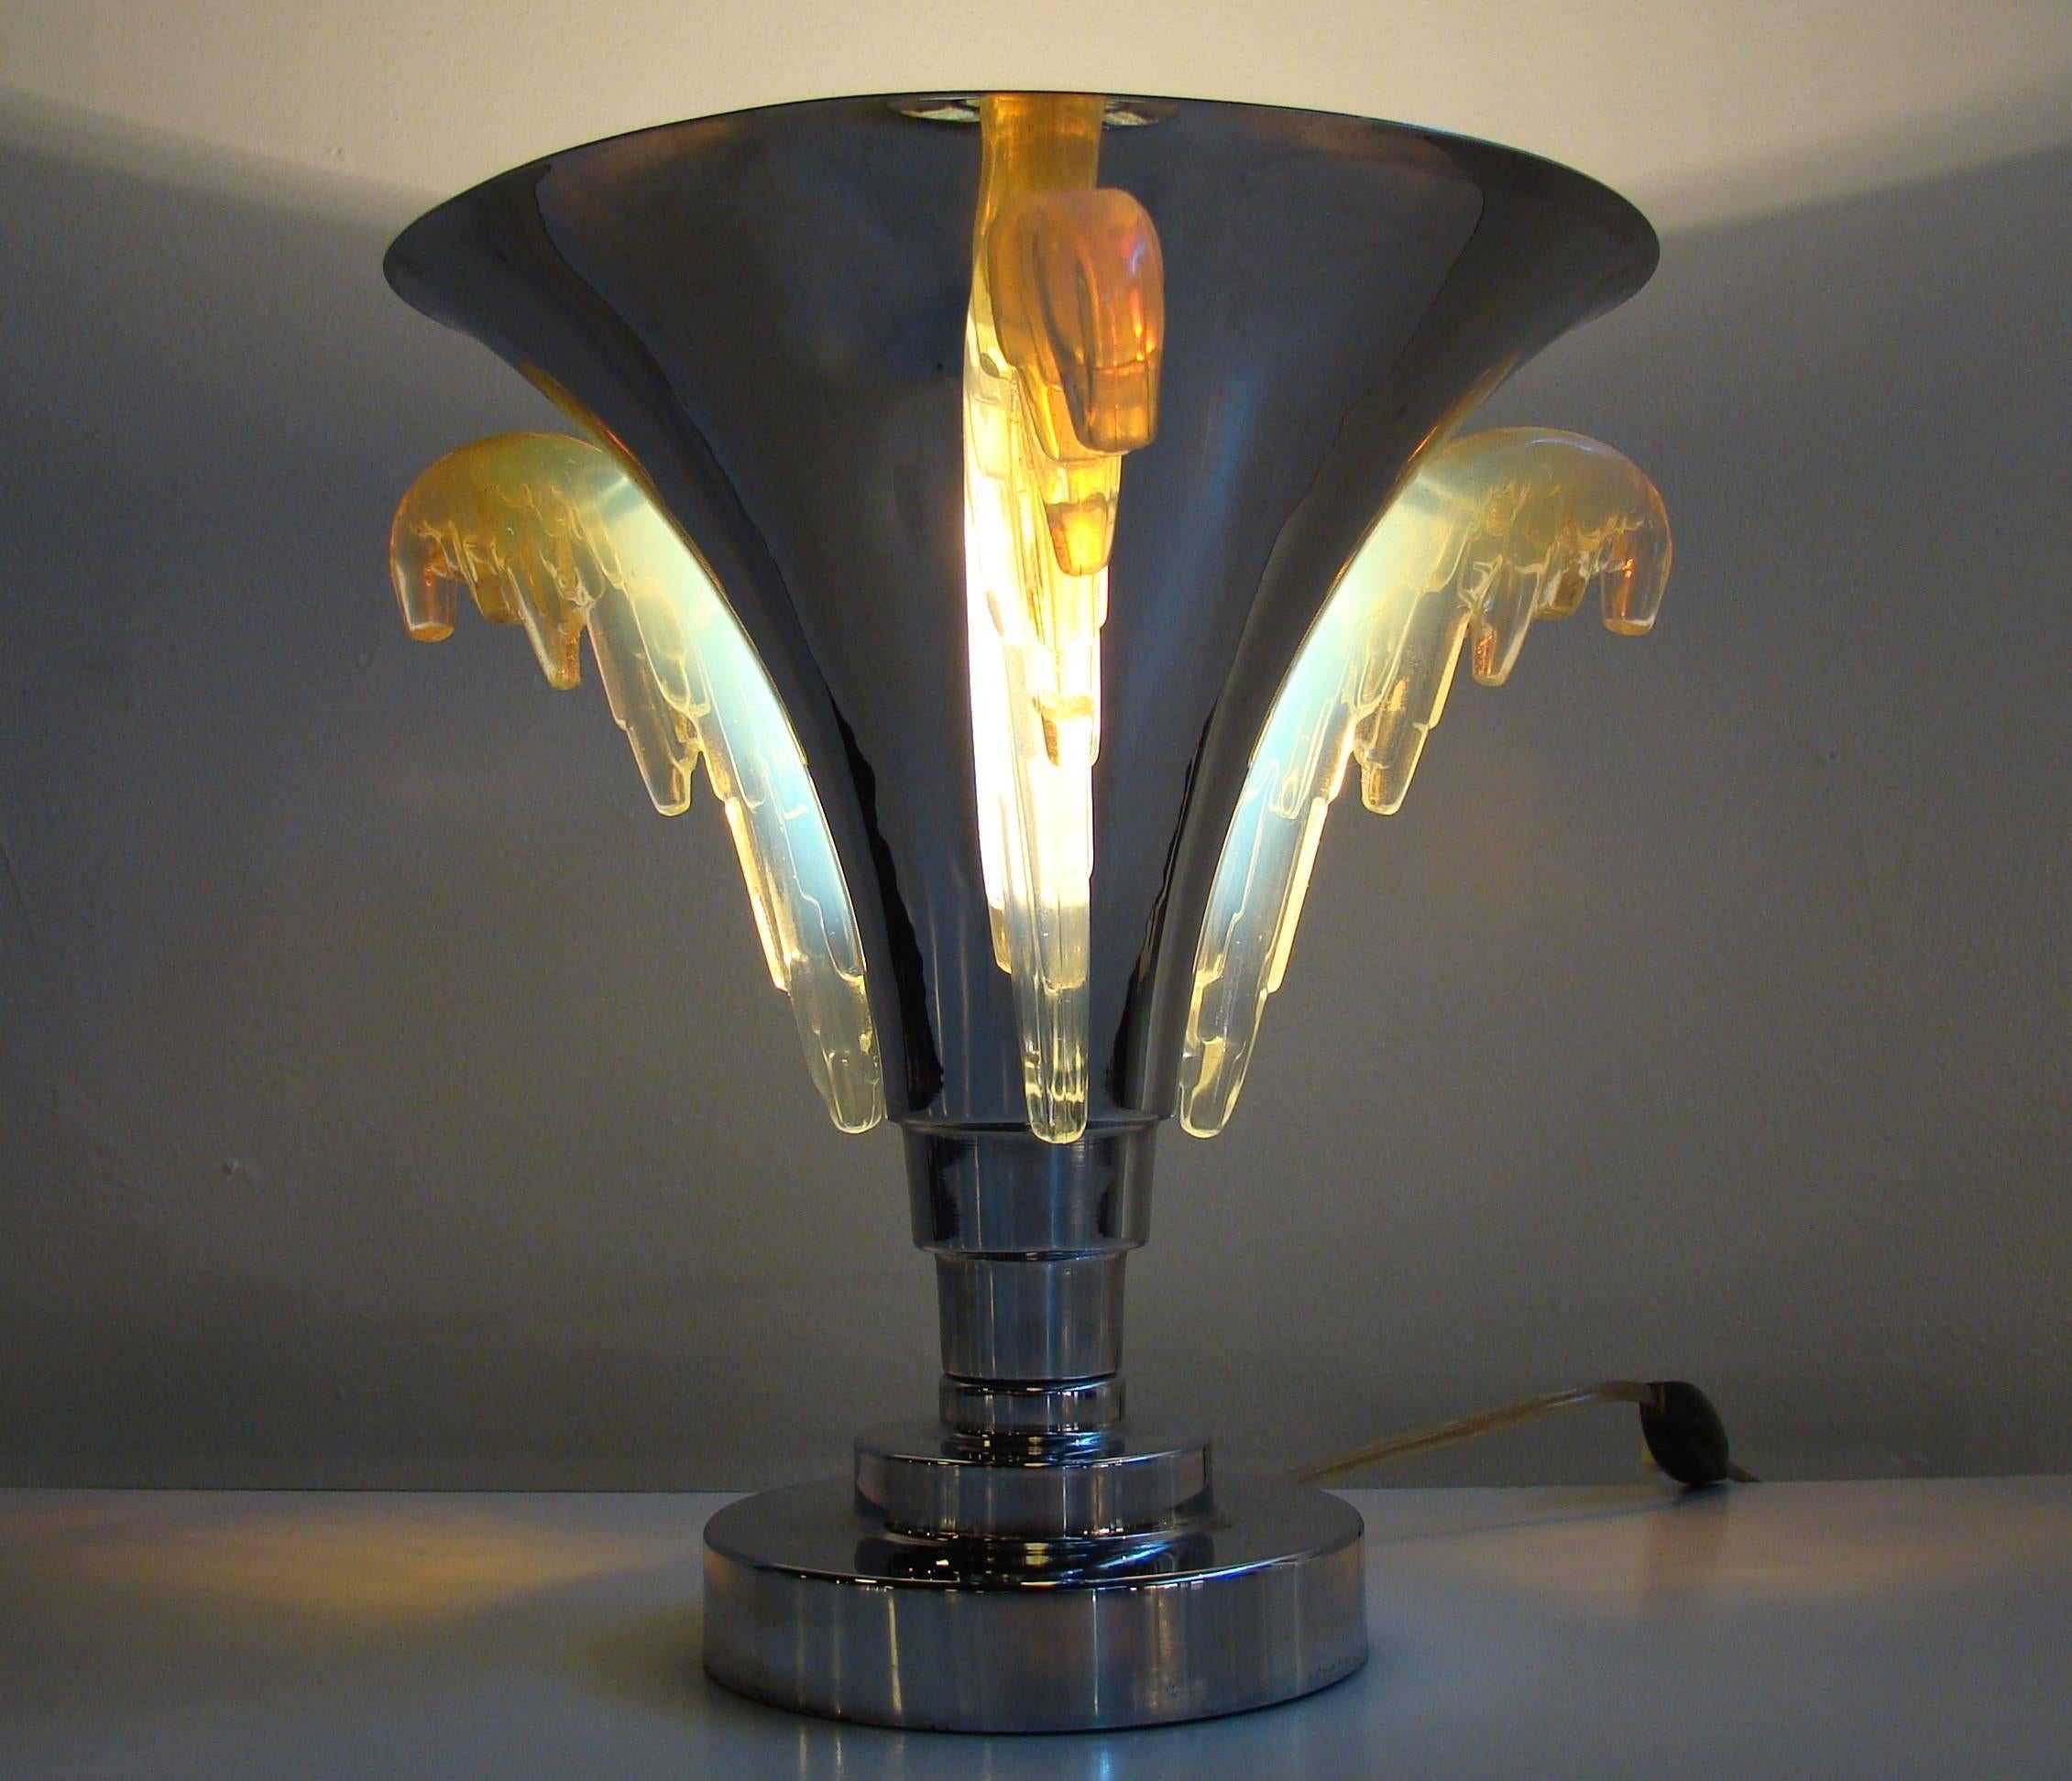 Exceptional French deco chrome torchiere with stepped base and translucent glass wings (probably Sabino glass). When illuminated, the lamp is exquisite. The glass piece that attaches to the inside of the lamp is stamped Melusine, Paris, France.